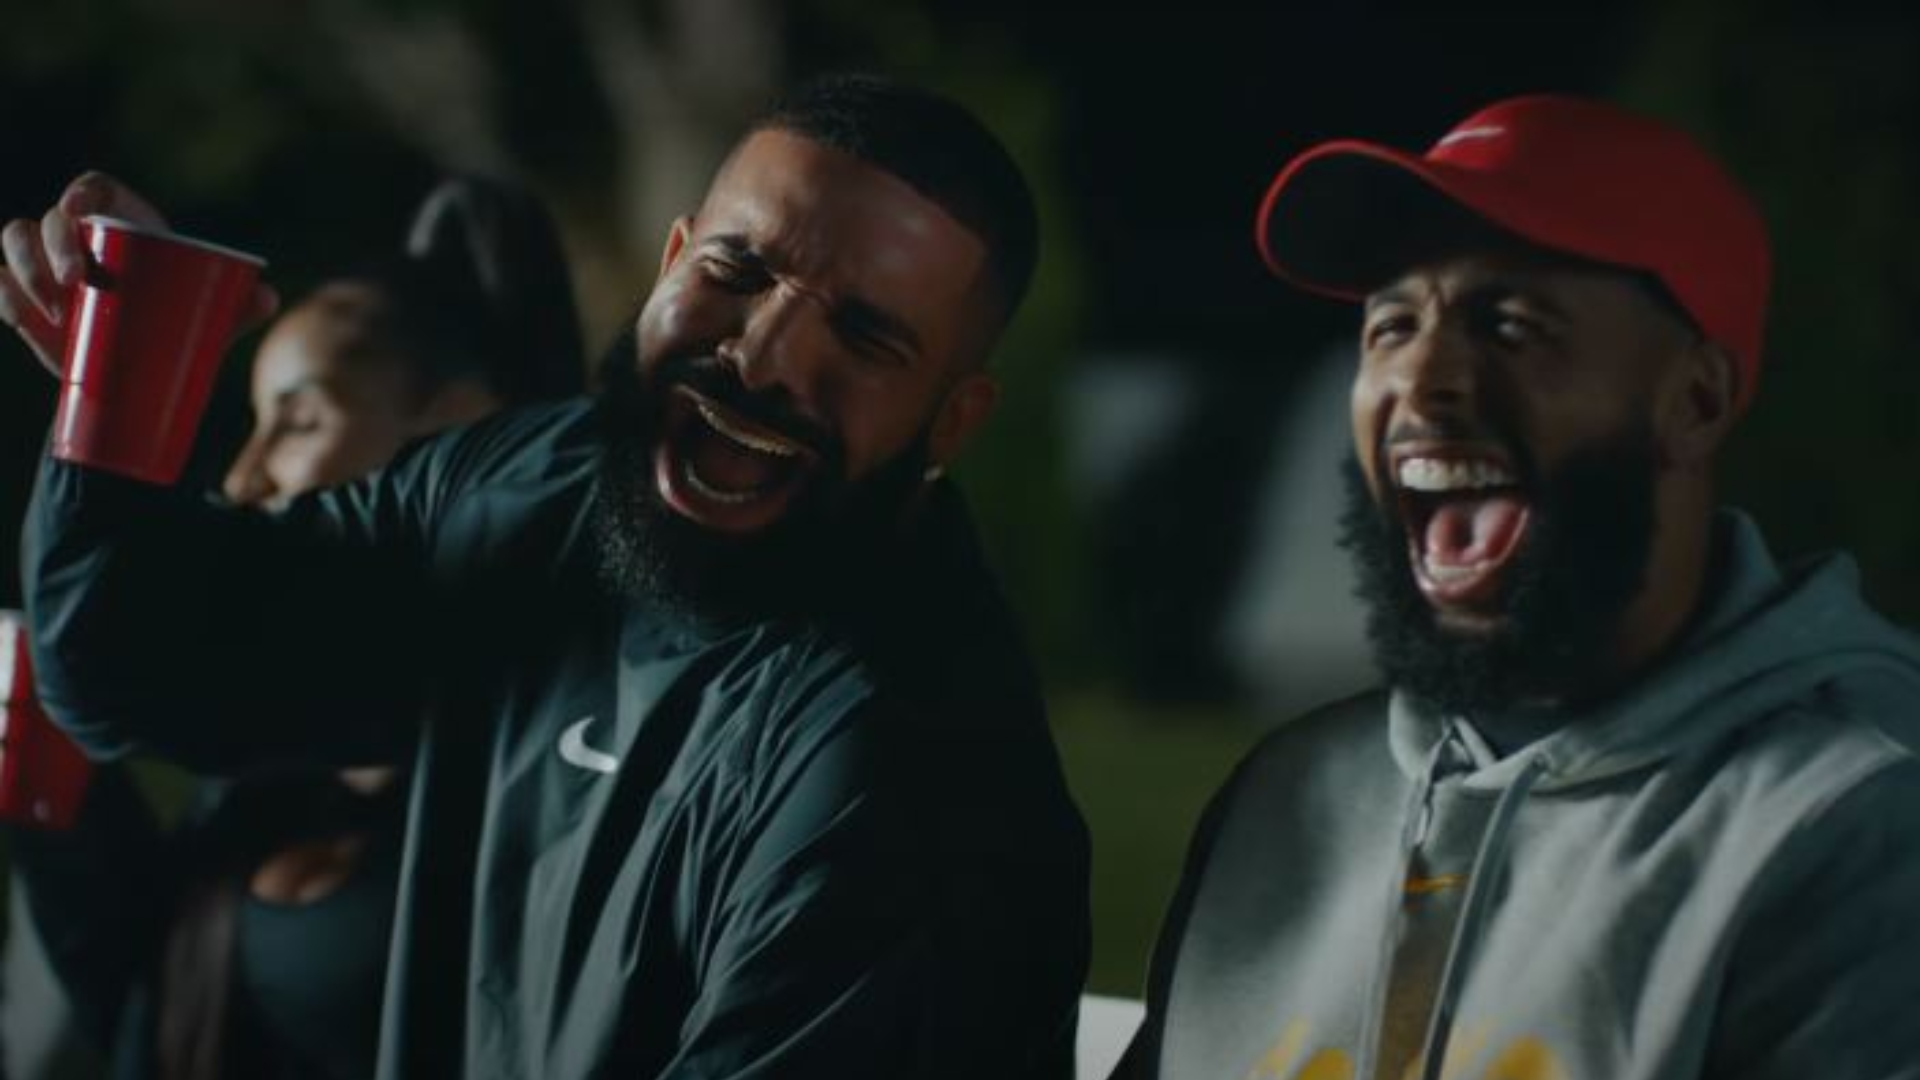 Drake Drops New Song “Laugh Now Cry Later”